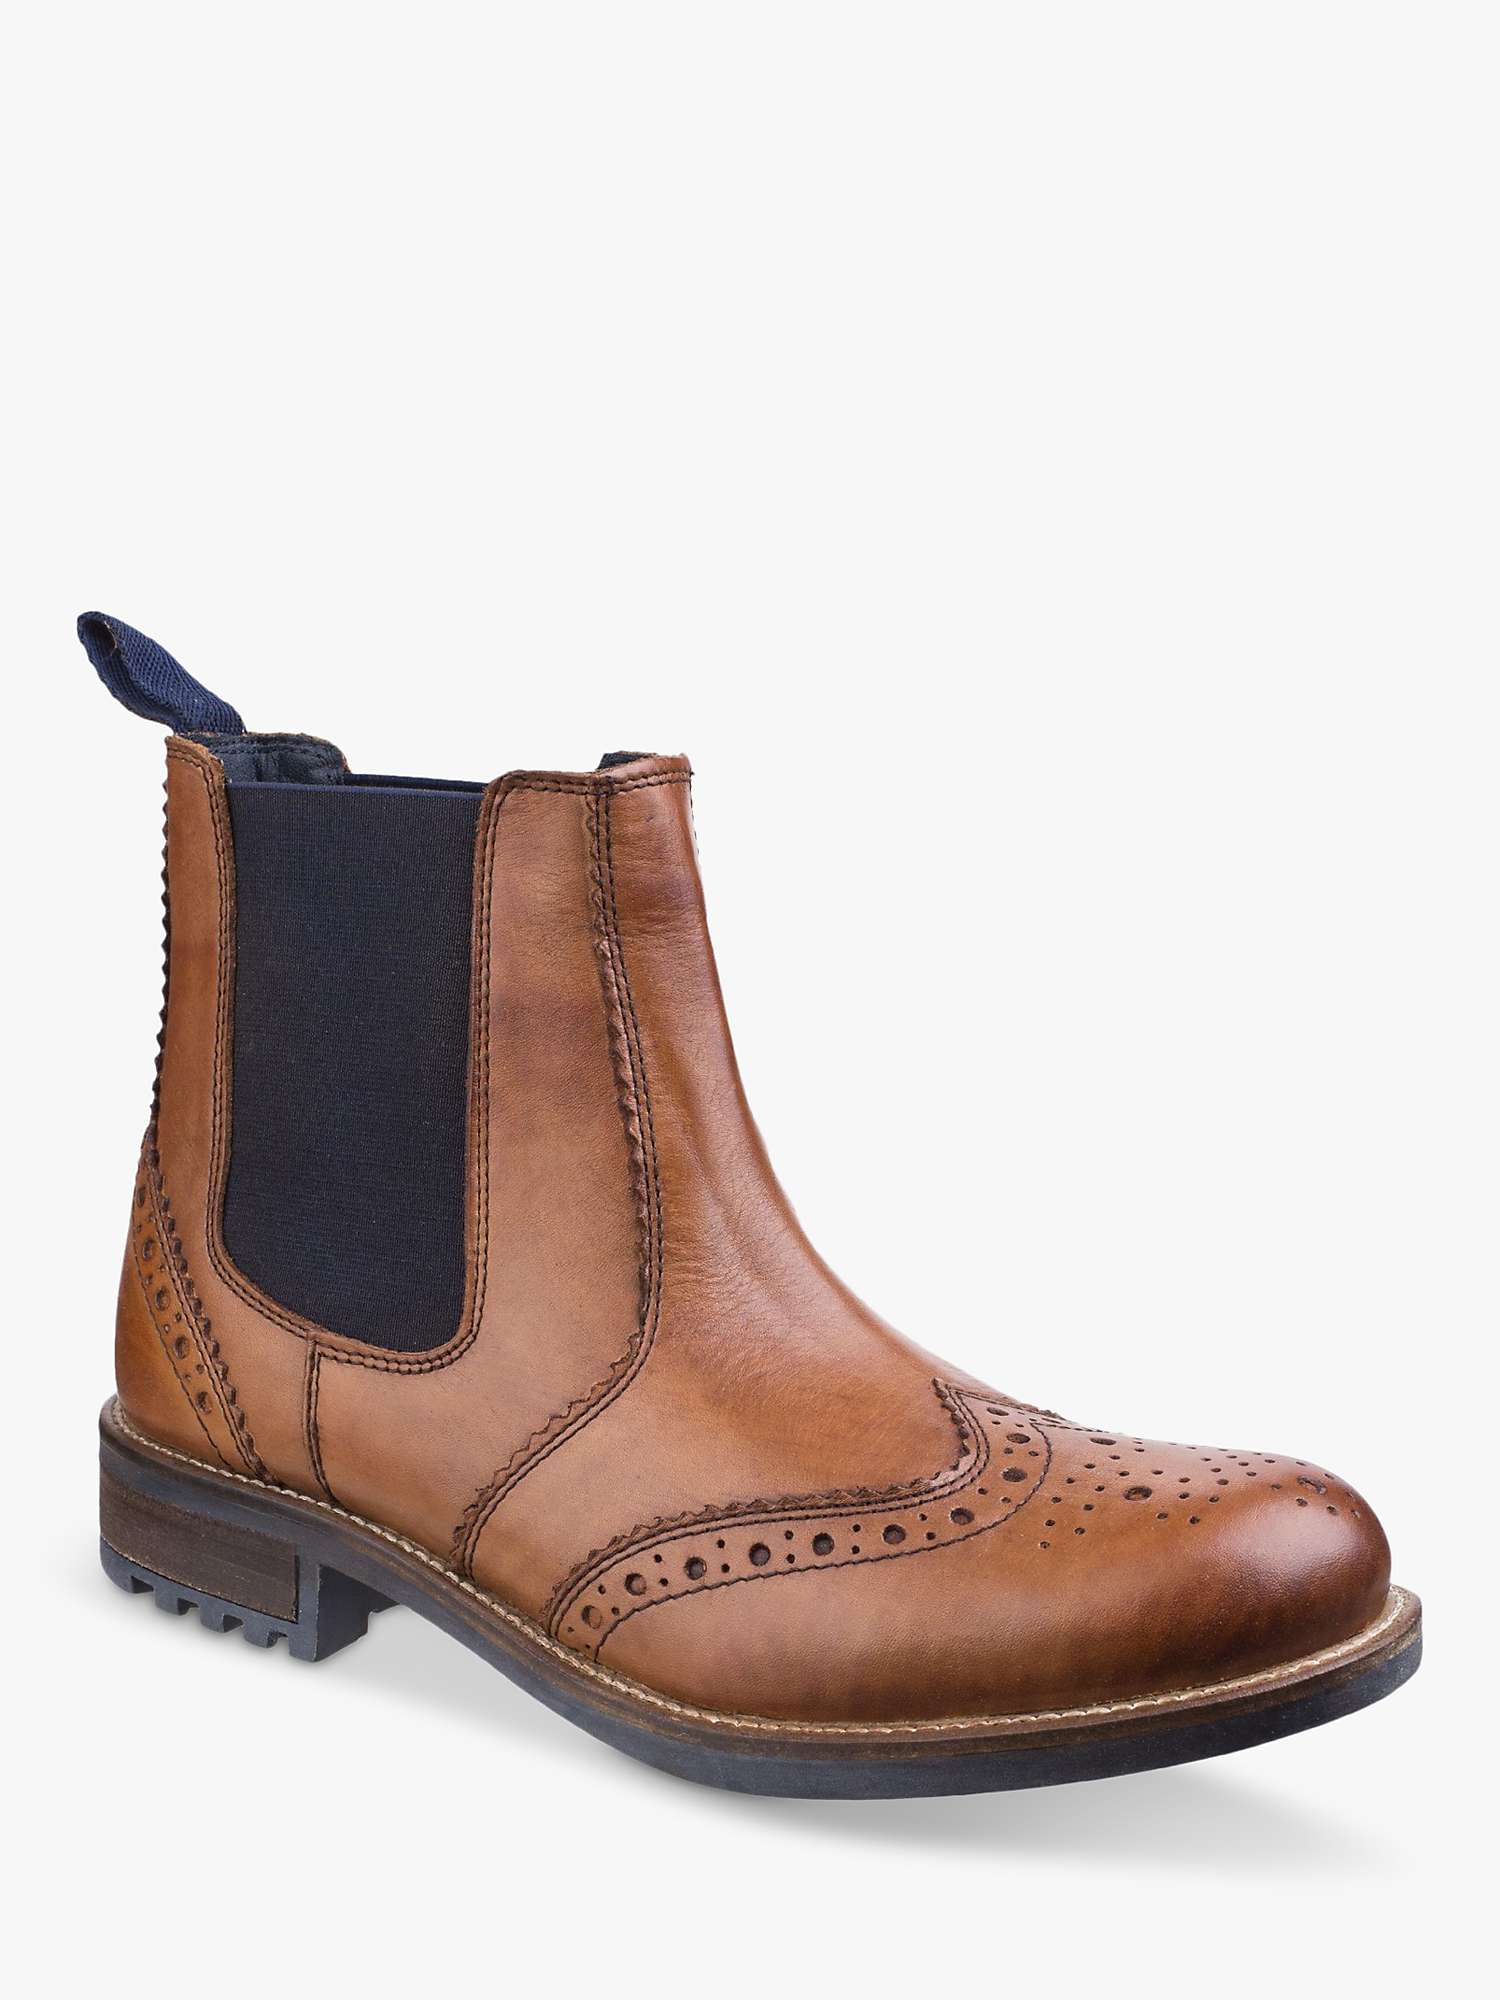 Buy Cotswold Cirencester Chelsea Leather Boots Online at johnlewis.com